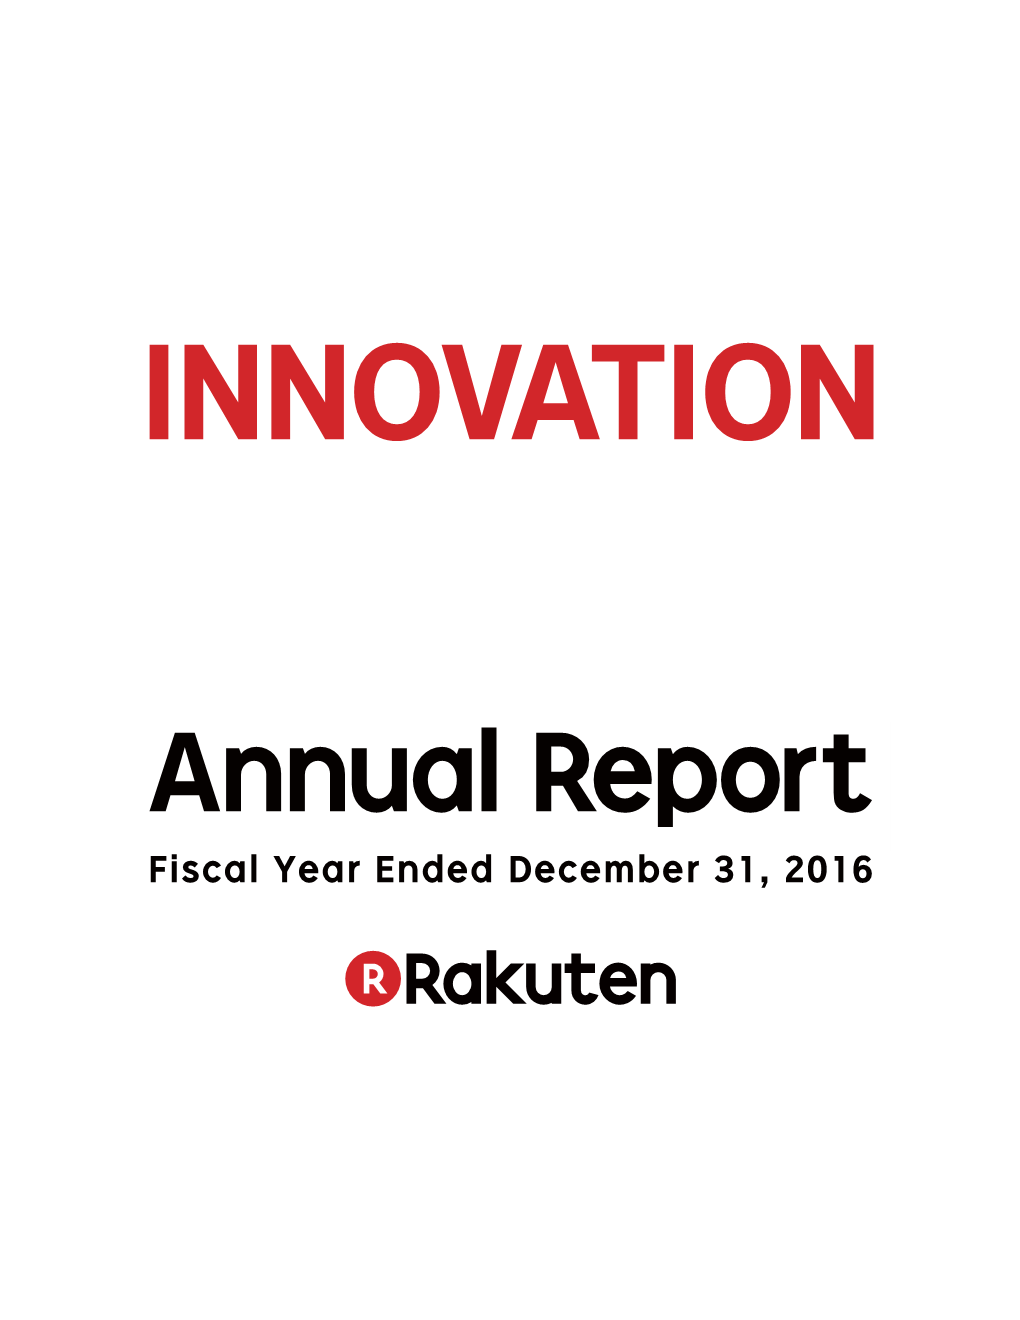 Annual Report Fiscal Year Ended December 31, 2016 Rakuten Ecosystem